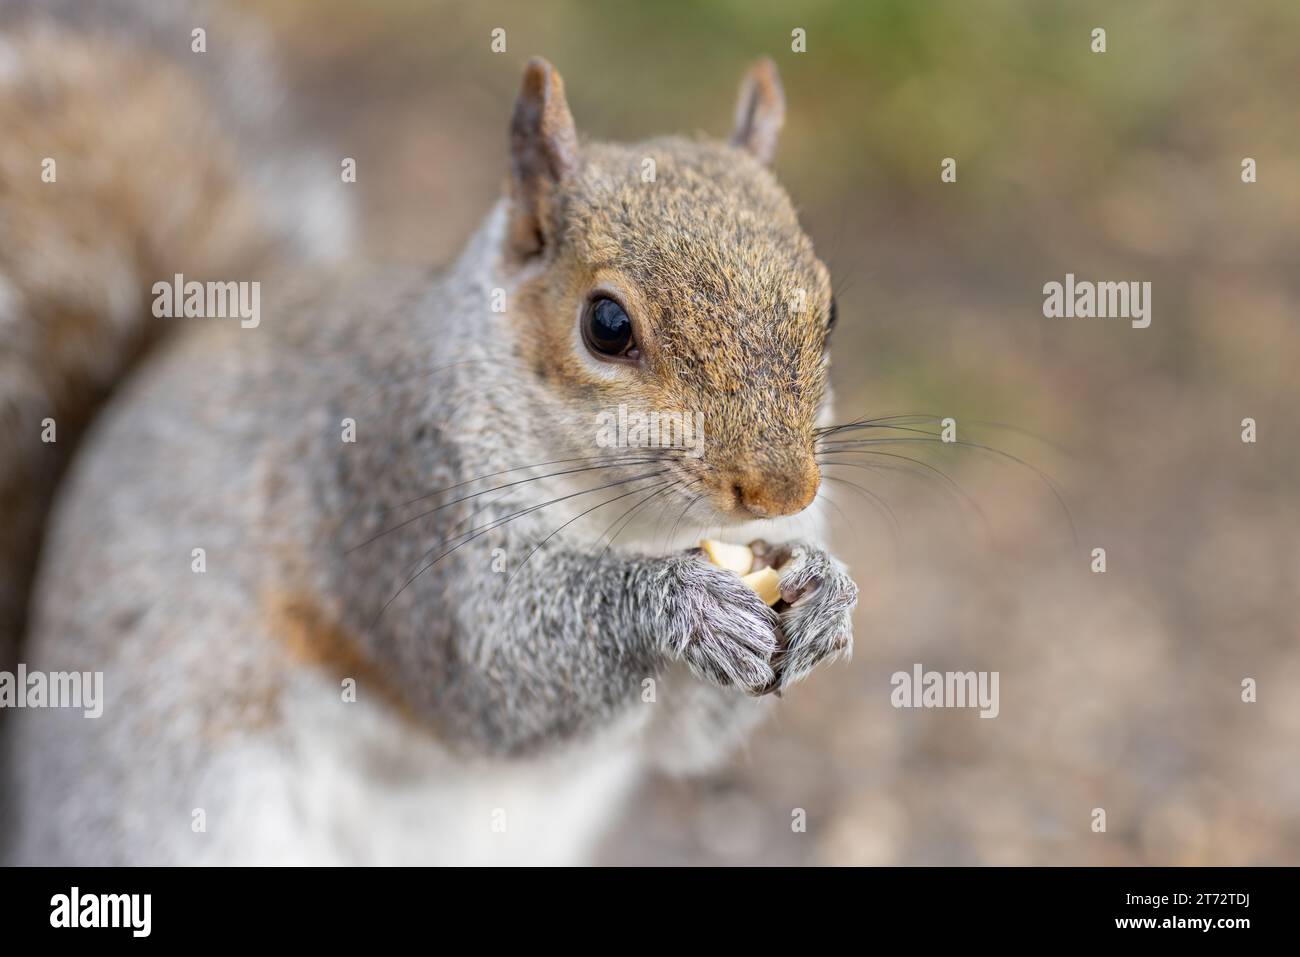 Close up of a squirrel with a diffused background. Stock Photo